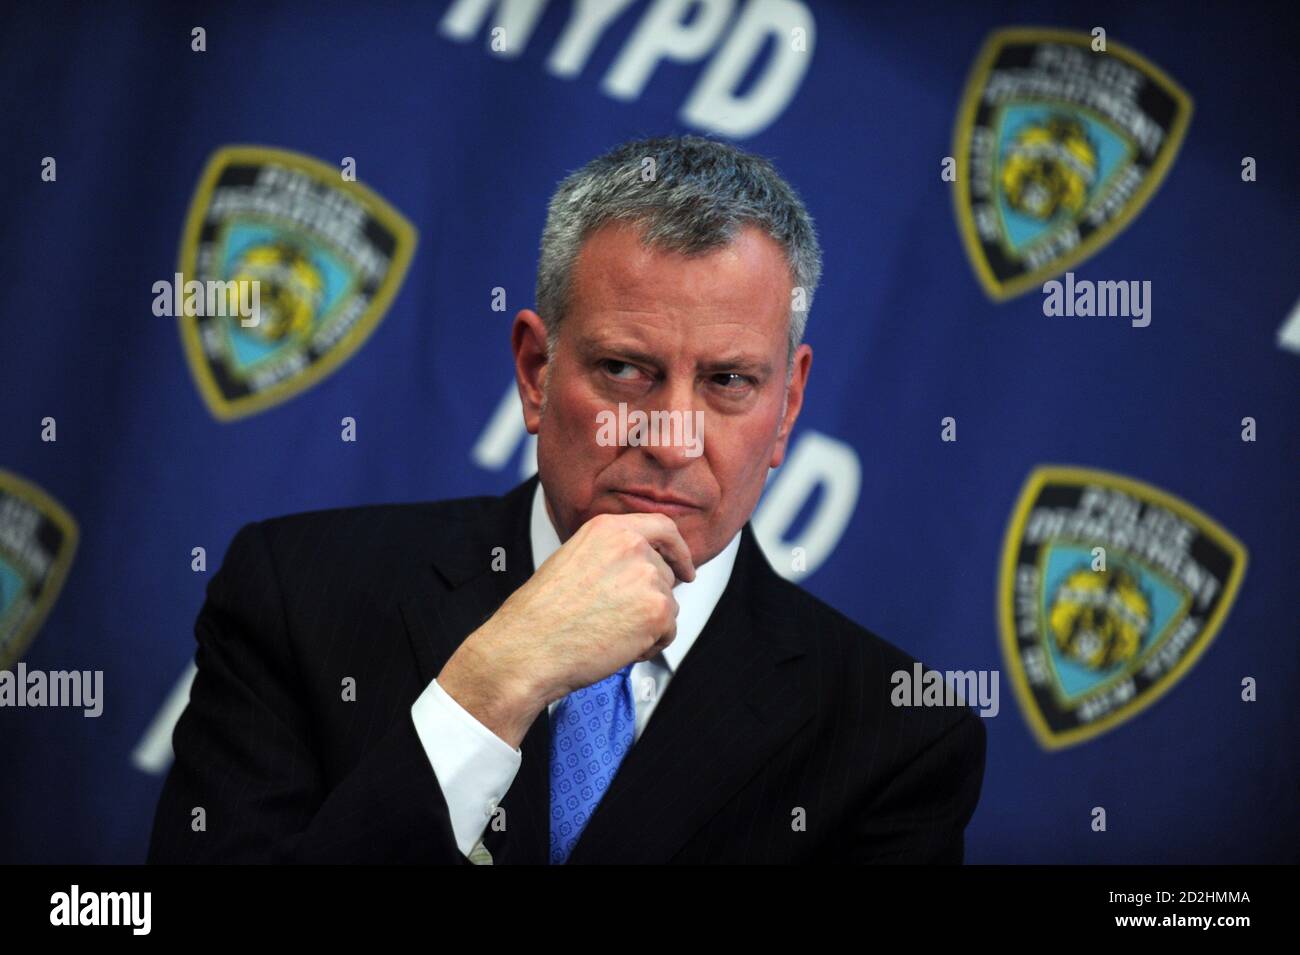 NEW YORK, NY - FEBRUARY 23: New York Mayor Bill de Blasio and Police Commissioner William Bratton announce CompStat 2.0 NYPD HQ on February 23, 2016 in New York City People:  Bill de Blasio Credit: Hoo-me / MediaPunch Stock Photo